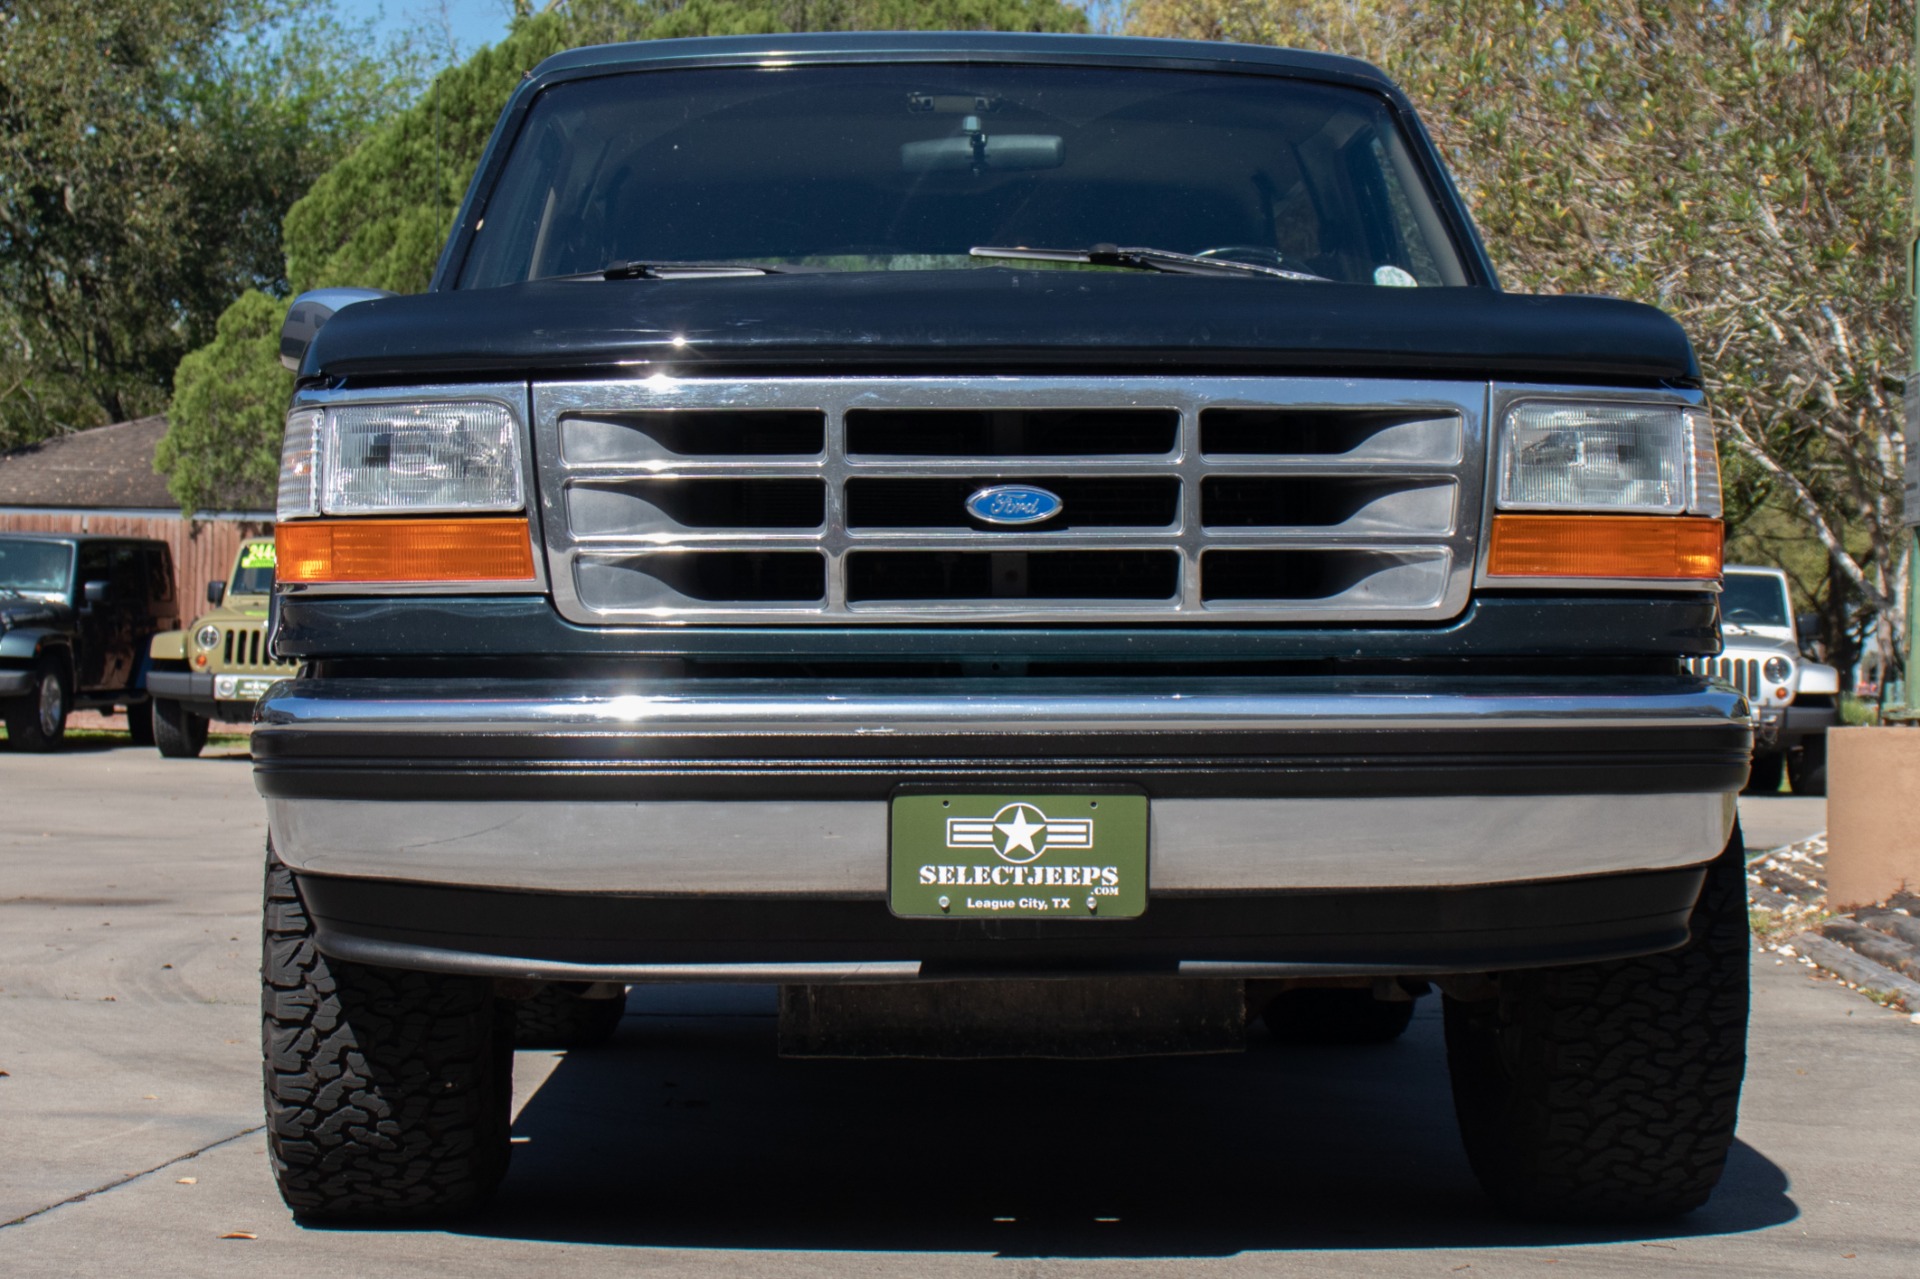 used-1994-ford-bronco-xlt-for-sale-13-995-select-jeeps-inc-stock